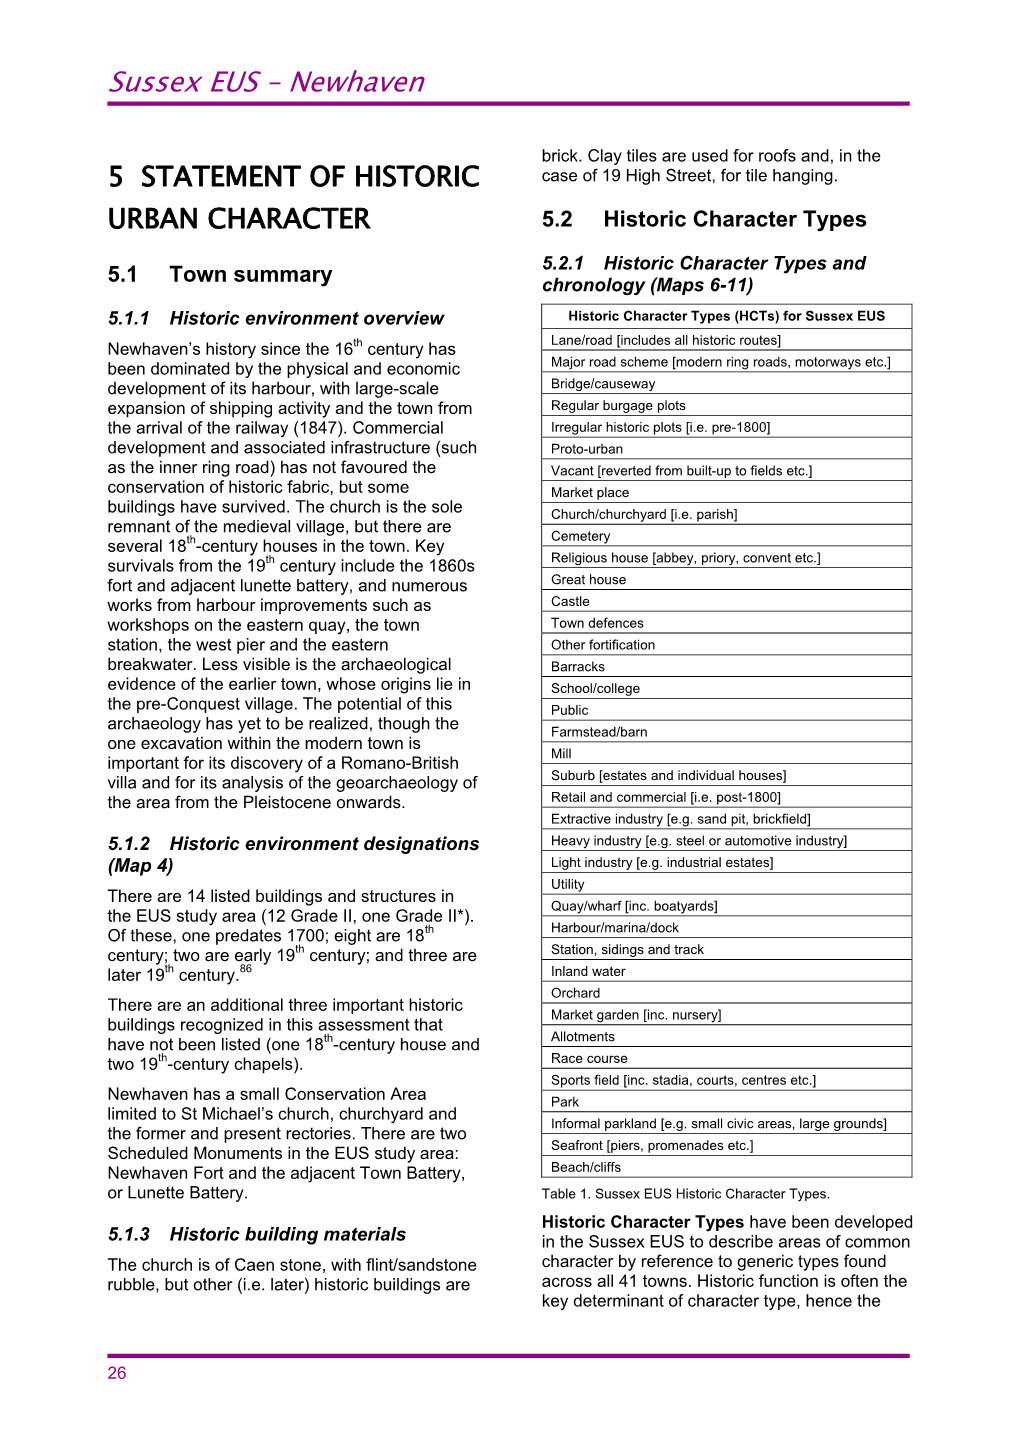 Newhaven Historic Character Assessment Report Pages 26 to 37